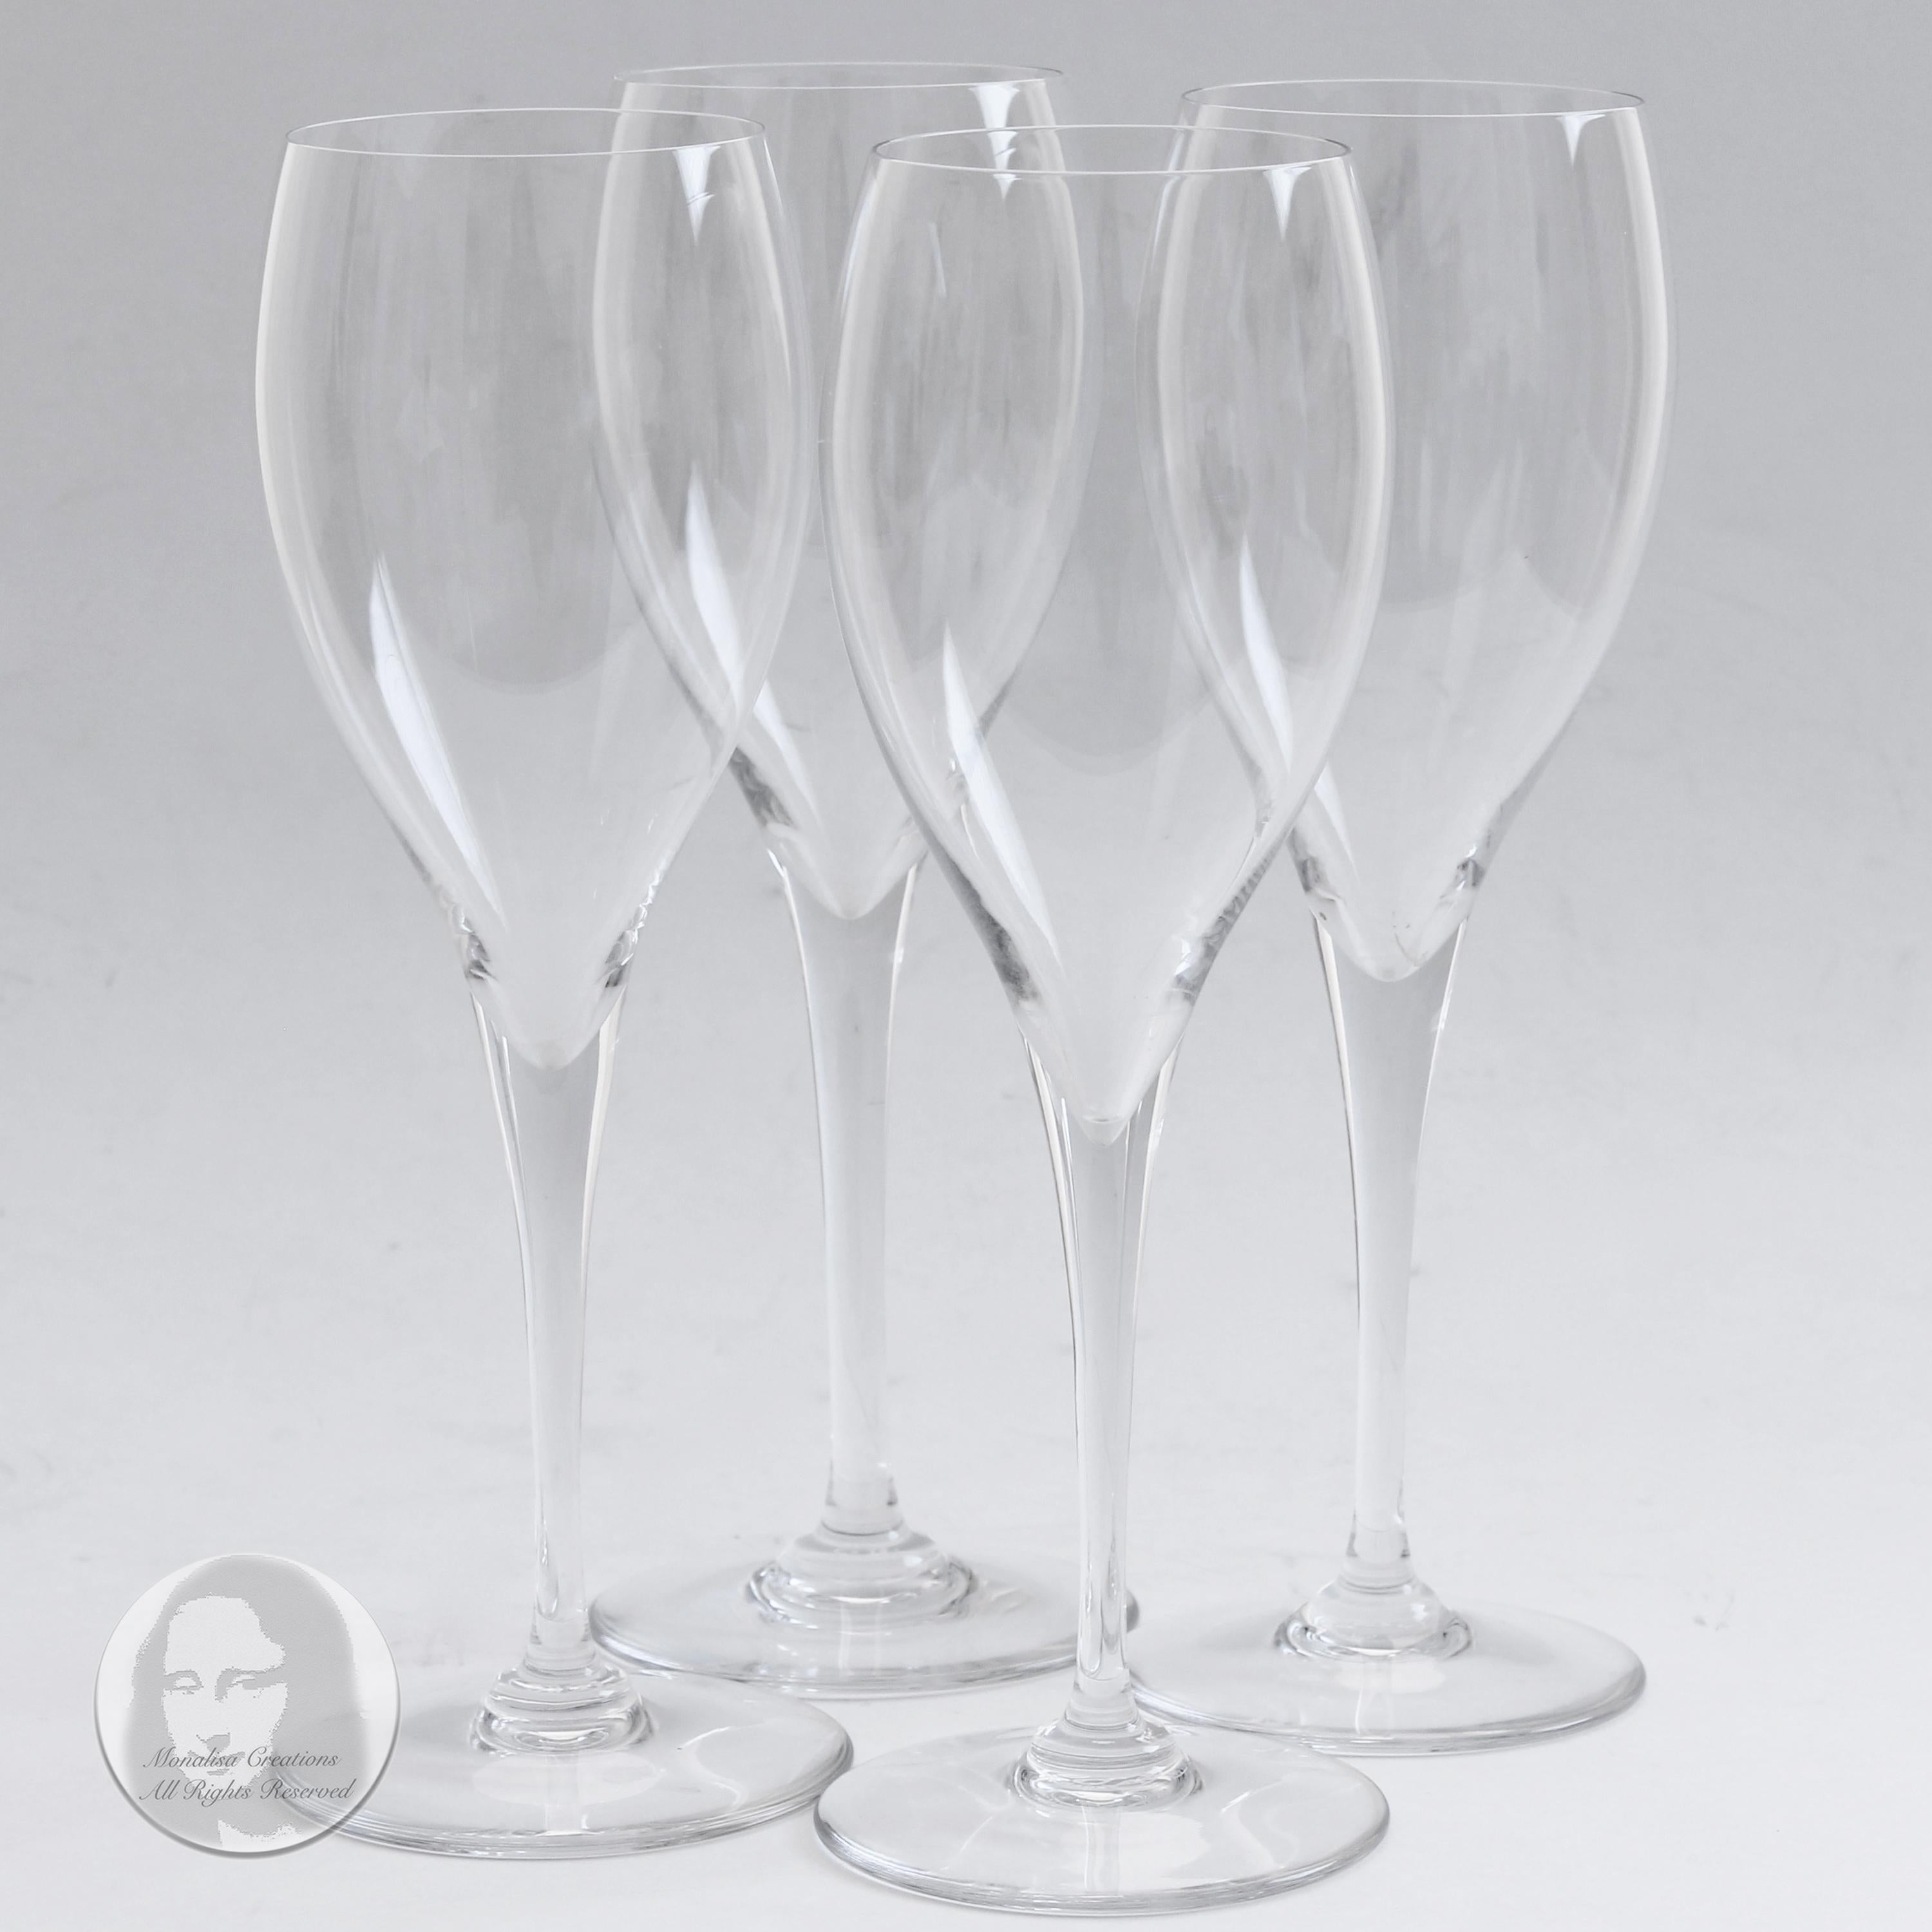 Preowned, authentic Baccarat St. Remy pattern champagne flutes or tulips, likely made in the 80s. Made from crystal, these elegant stemware pieces will add a touch of luxury to your gatherings and celebrations! 

No box but this set of 4 pieces will